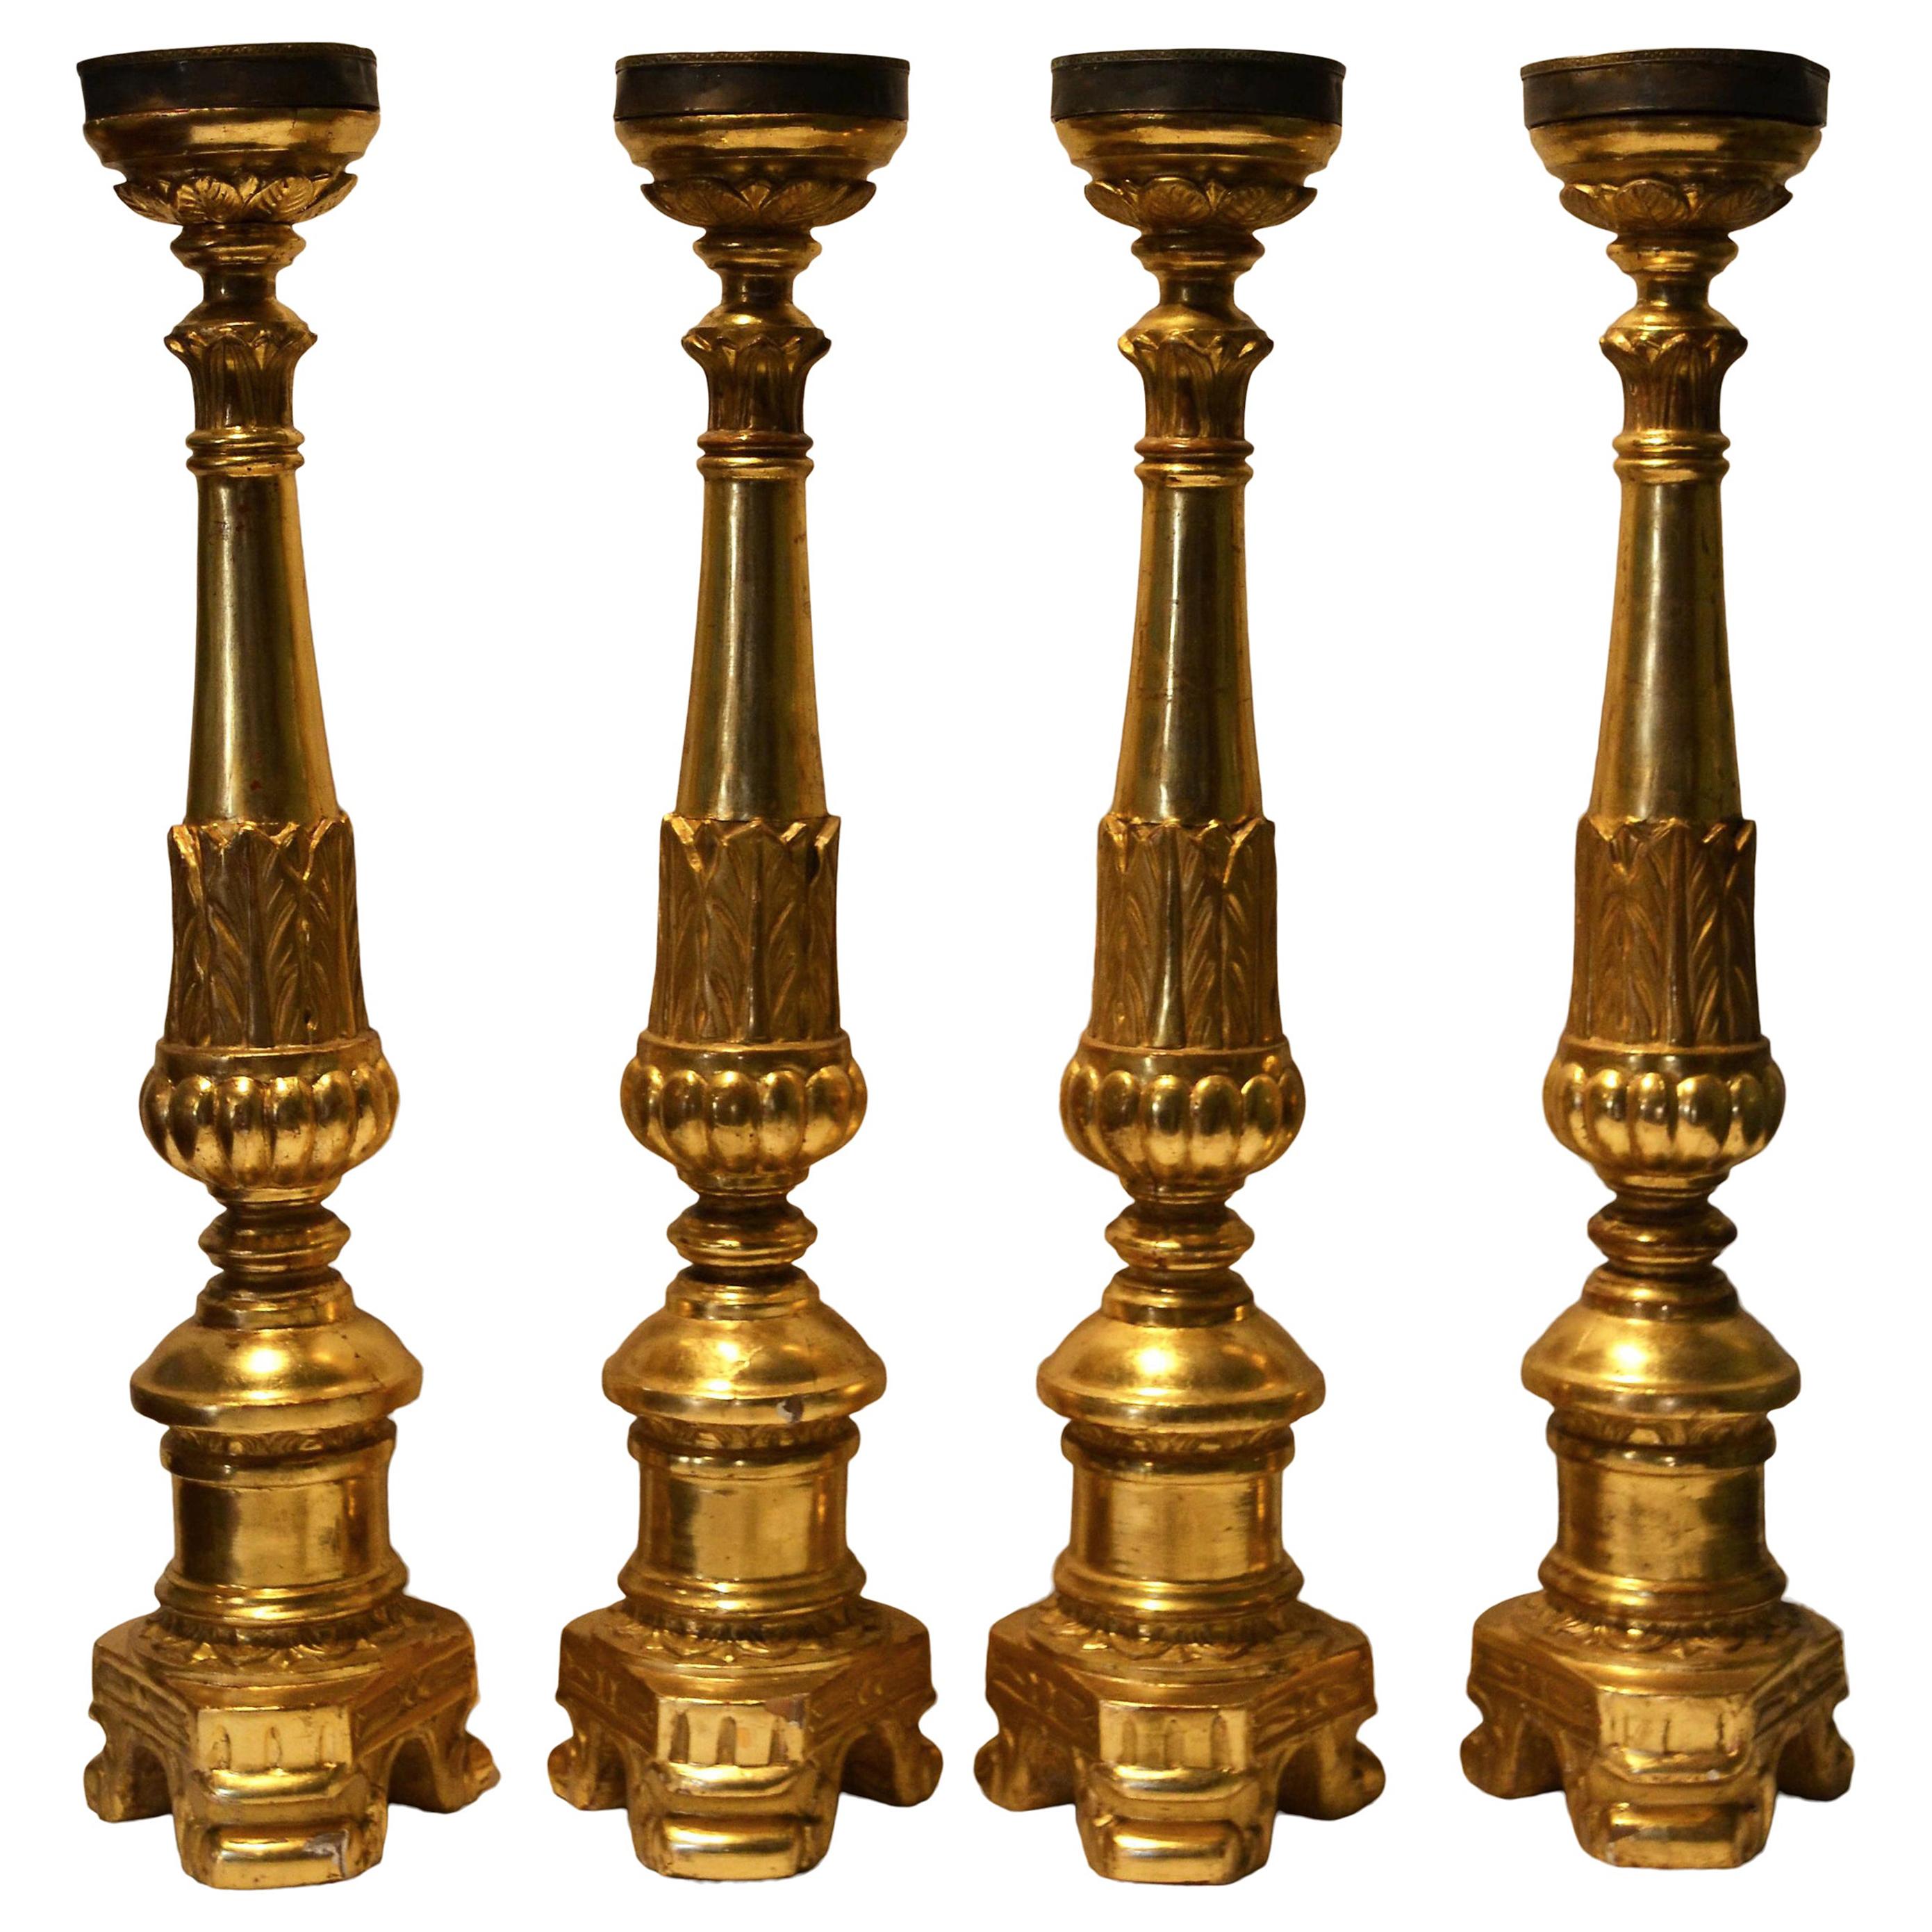 Set of Four Antique French Carved Giltwood Cathedral Candlesticks, Circa 1860.